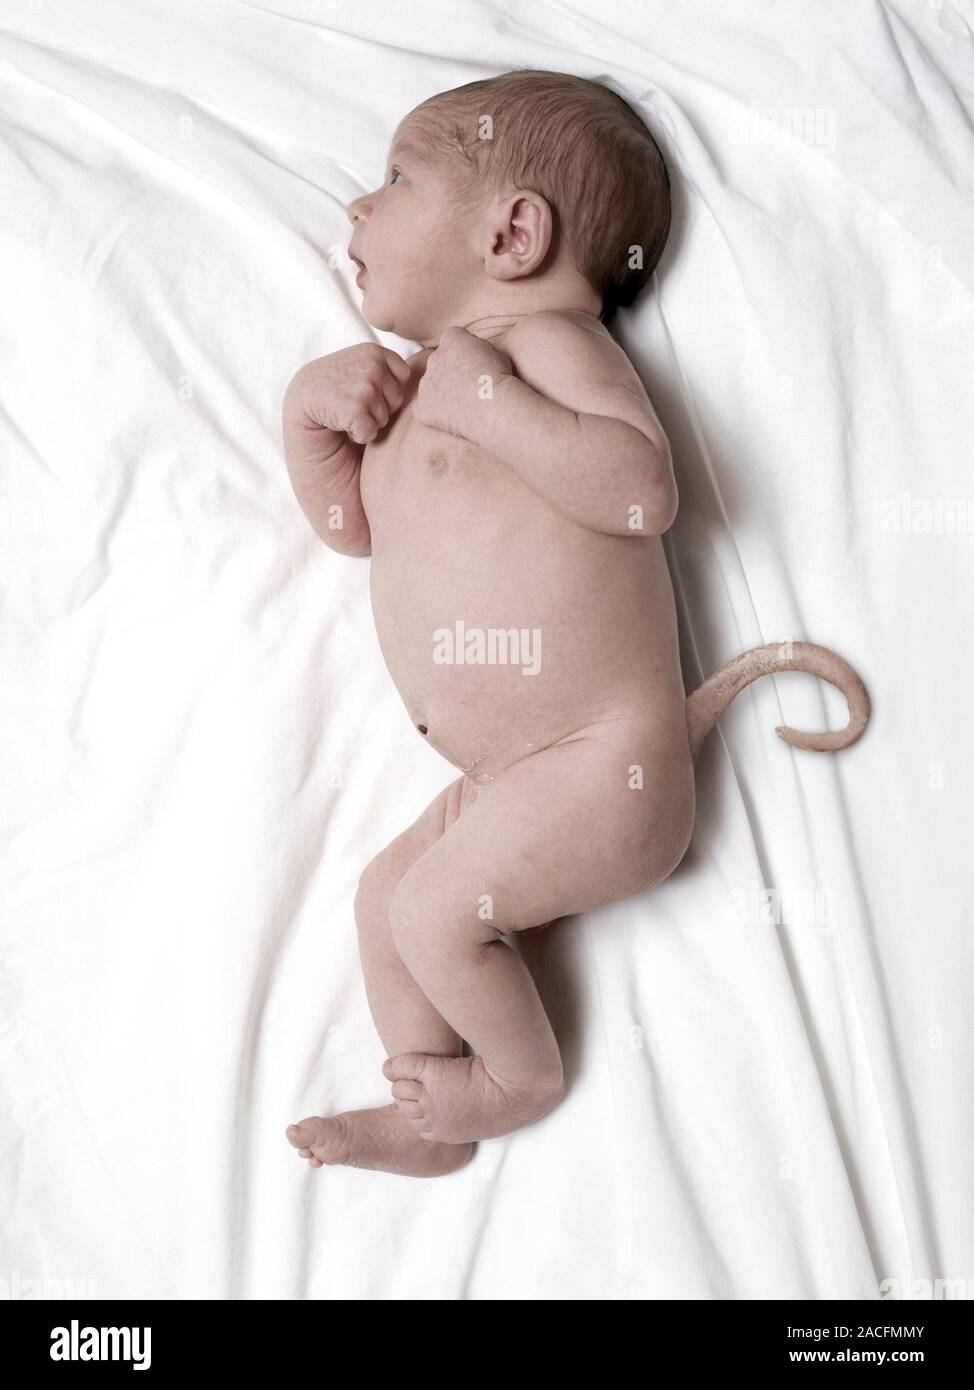 Human baby with a tail, digitally manipulated image. Stock Photo